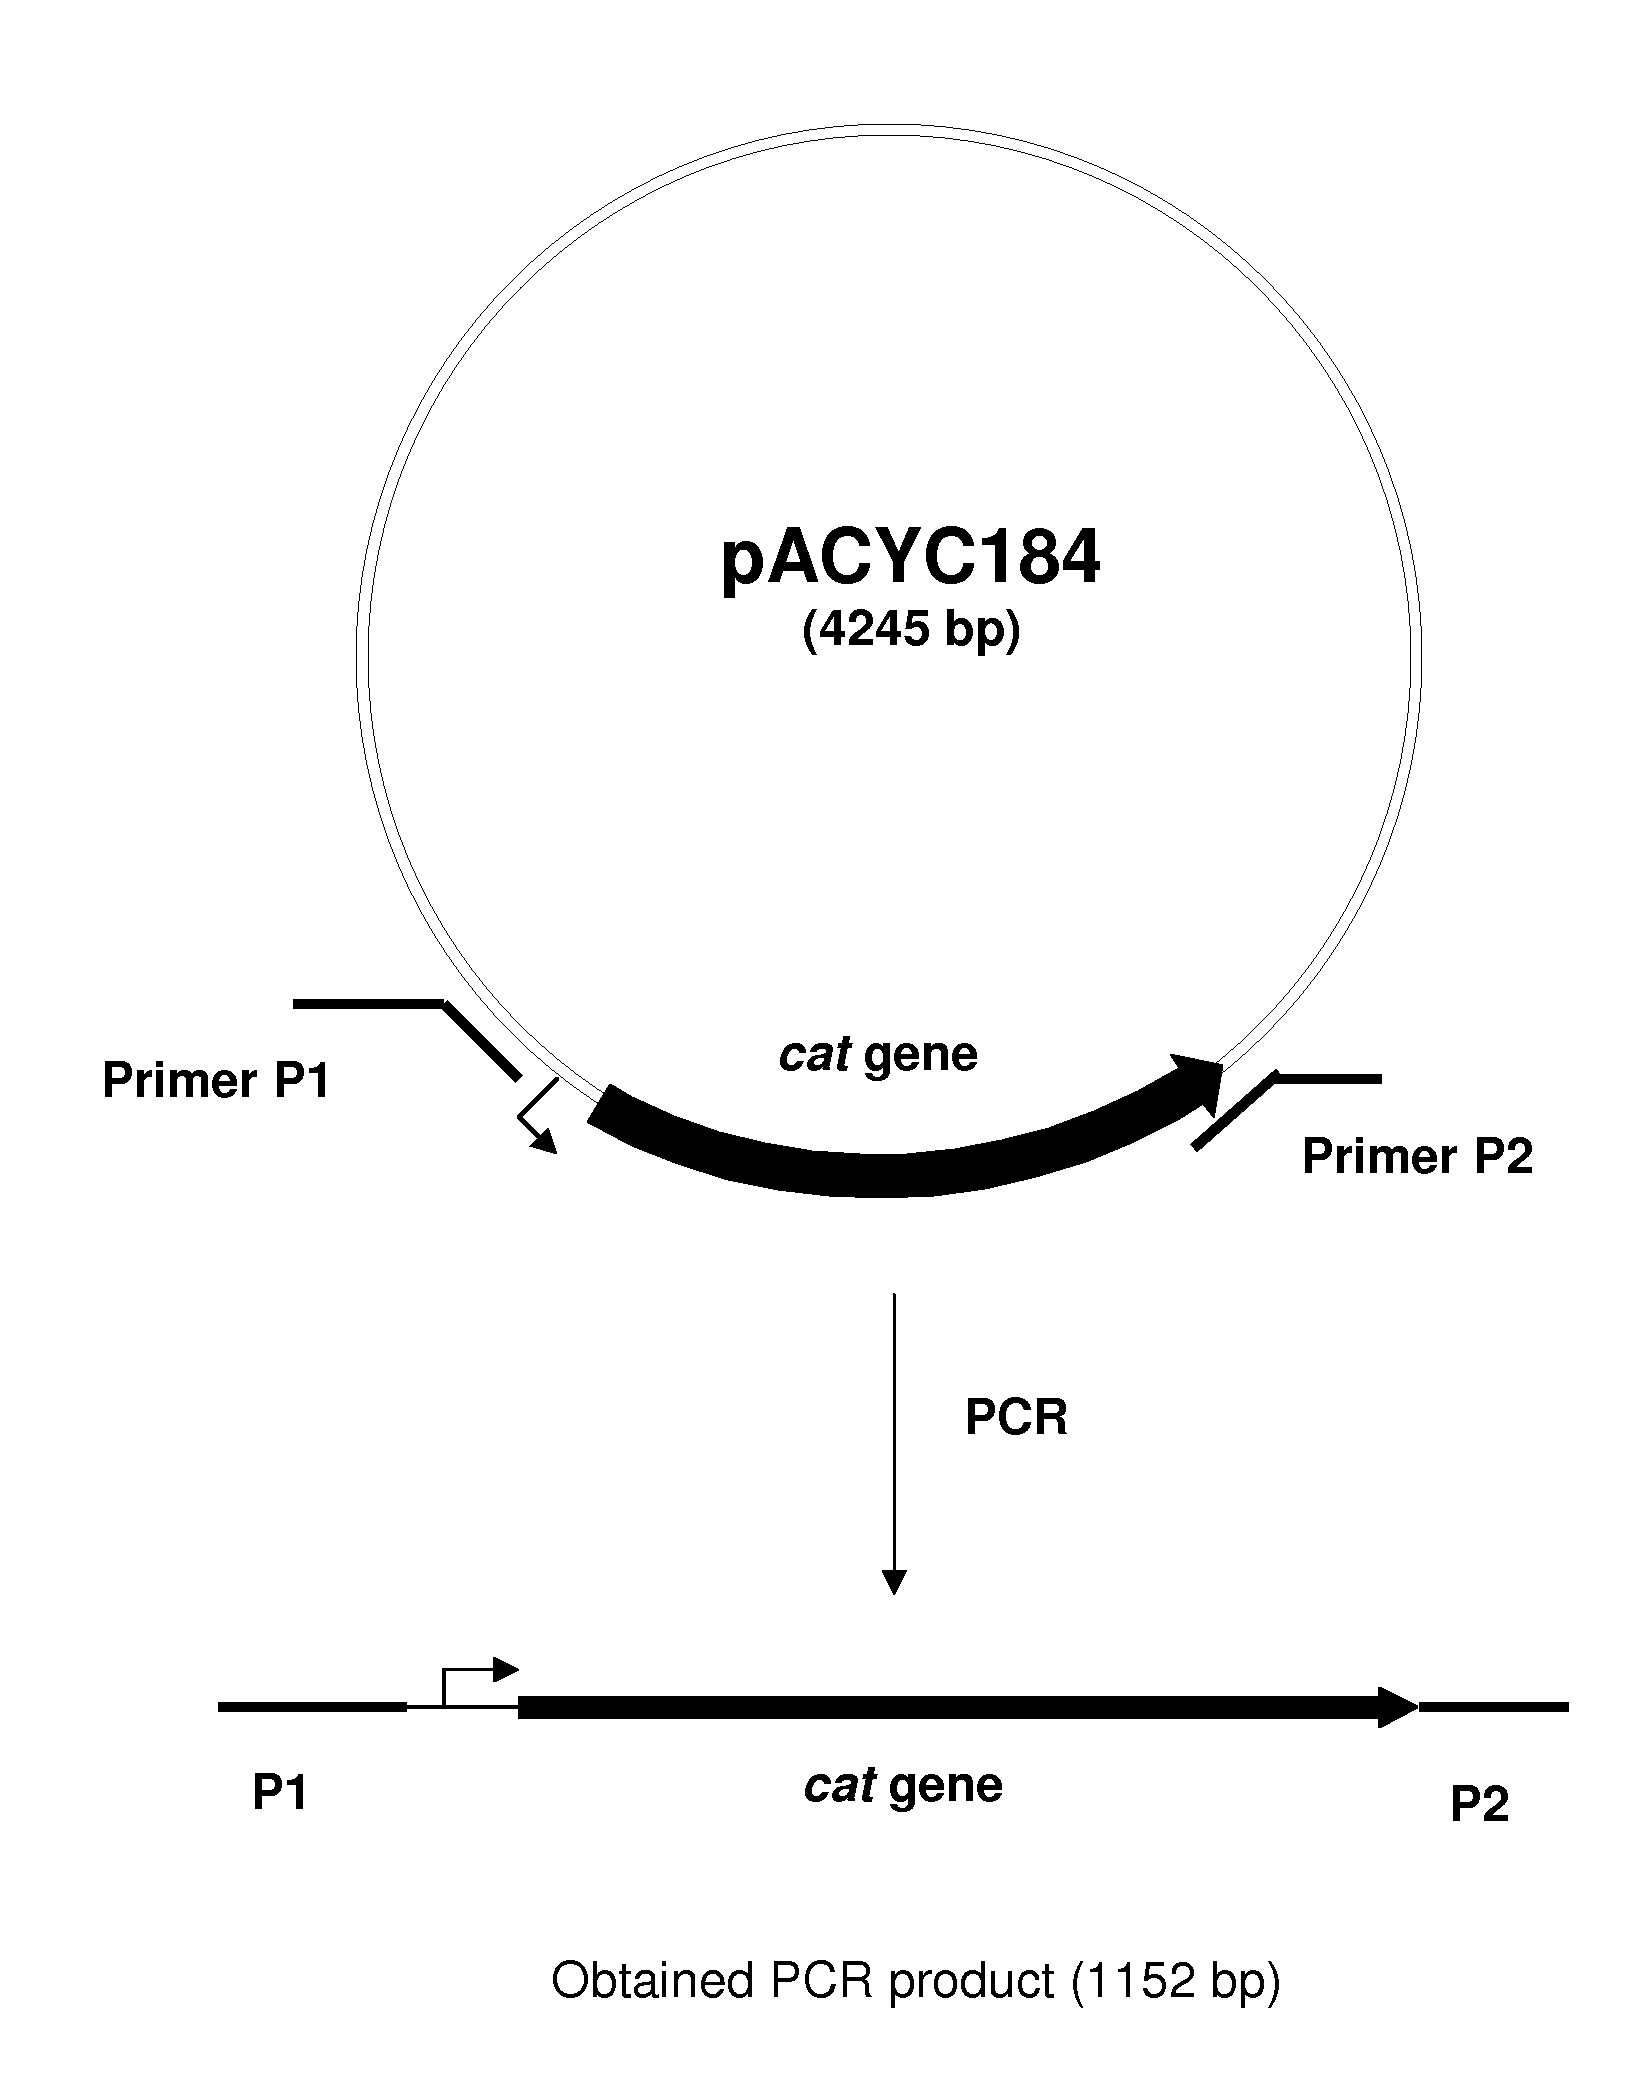 METHOD FOR PRODUCING AN L-AMINO ACID USING A BACTERIUM OF THE ENTEROBACTERIACEAE FAMILY WITH ATTENUATED EXPRESSION OF THE rspAB OPERON